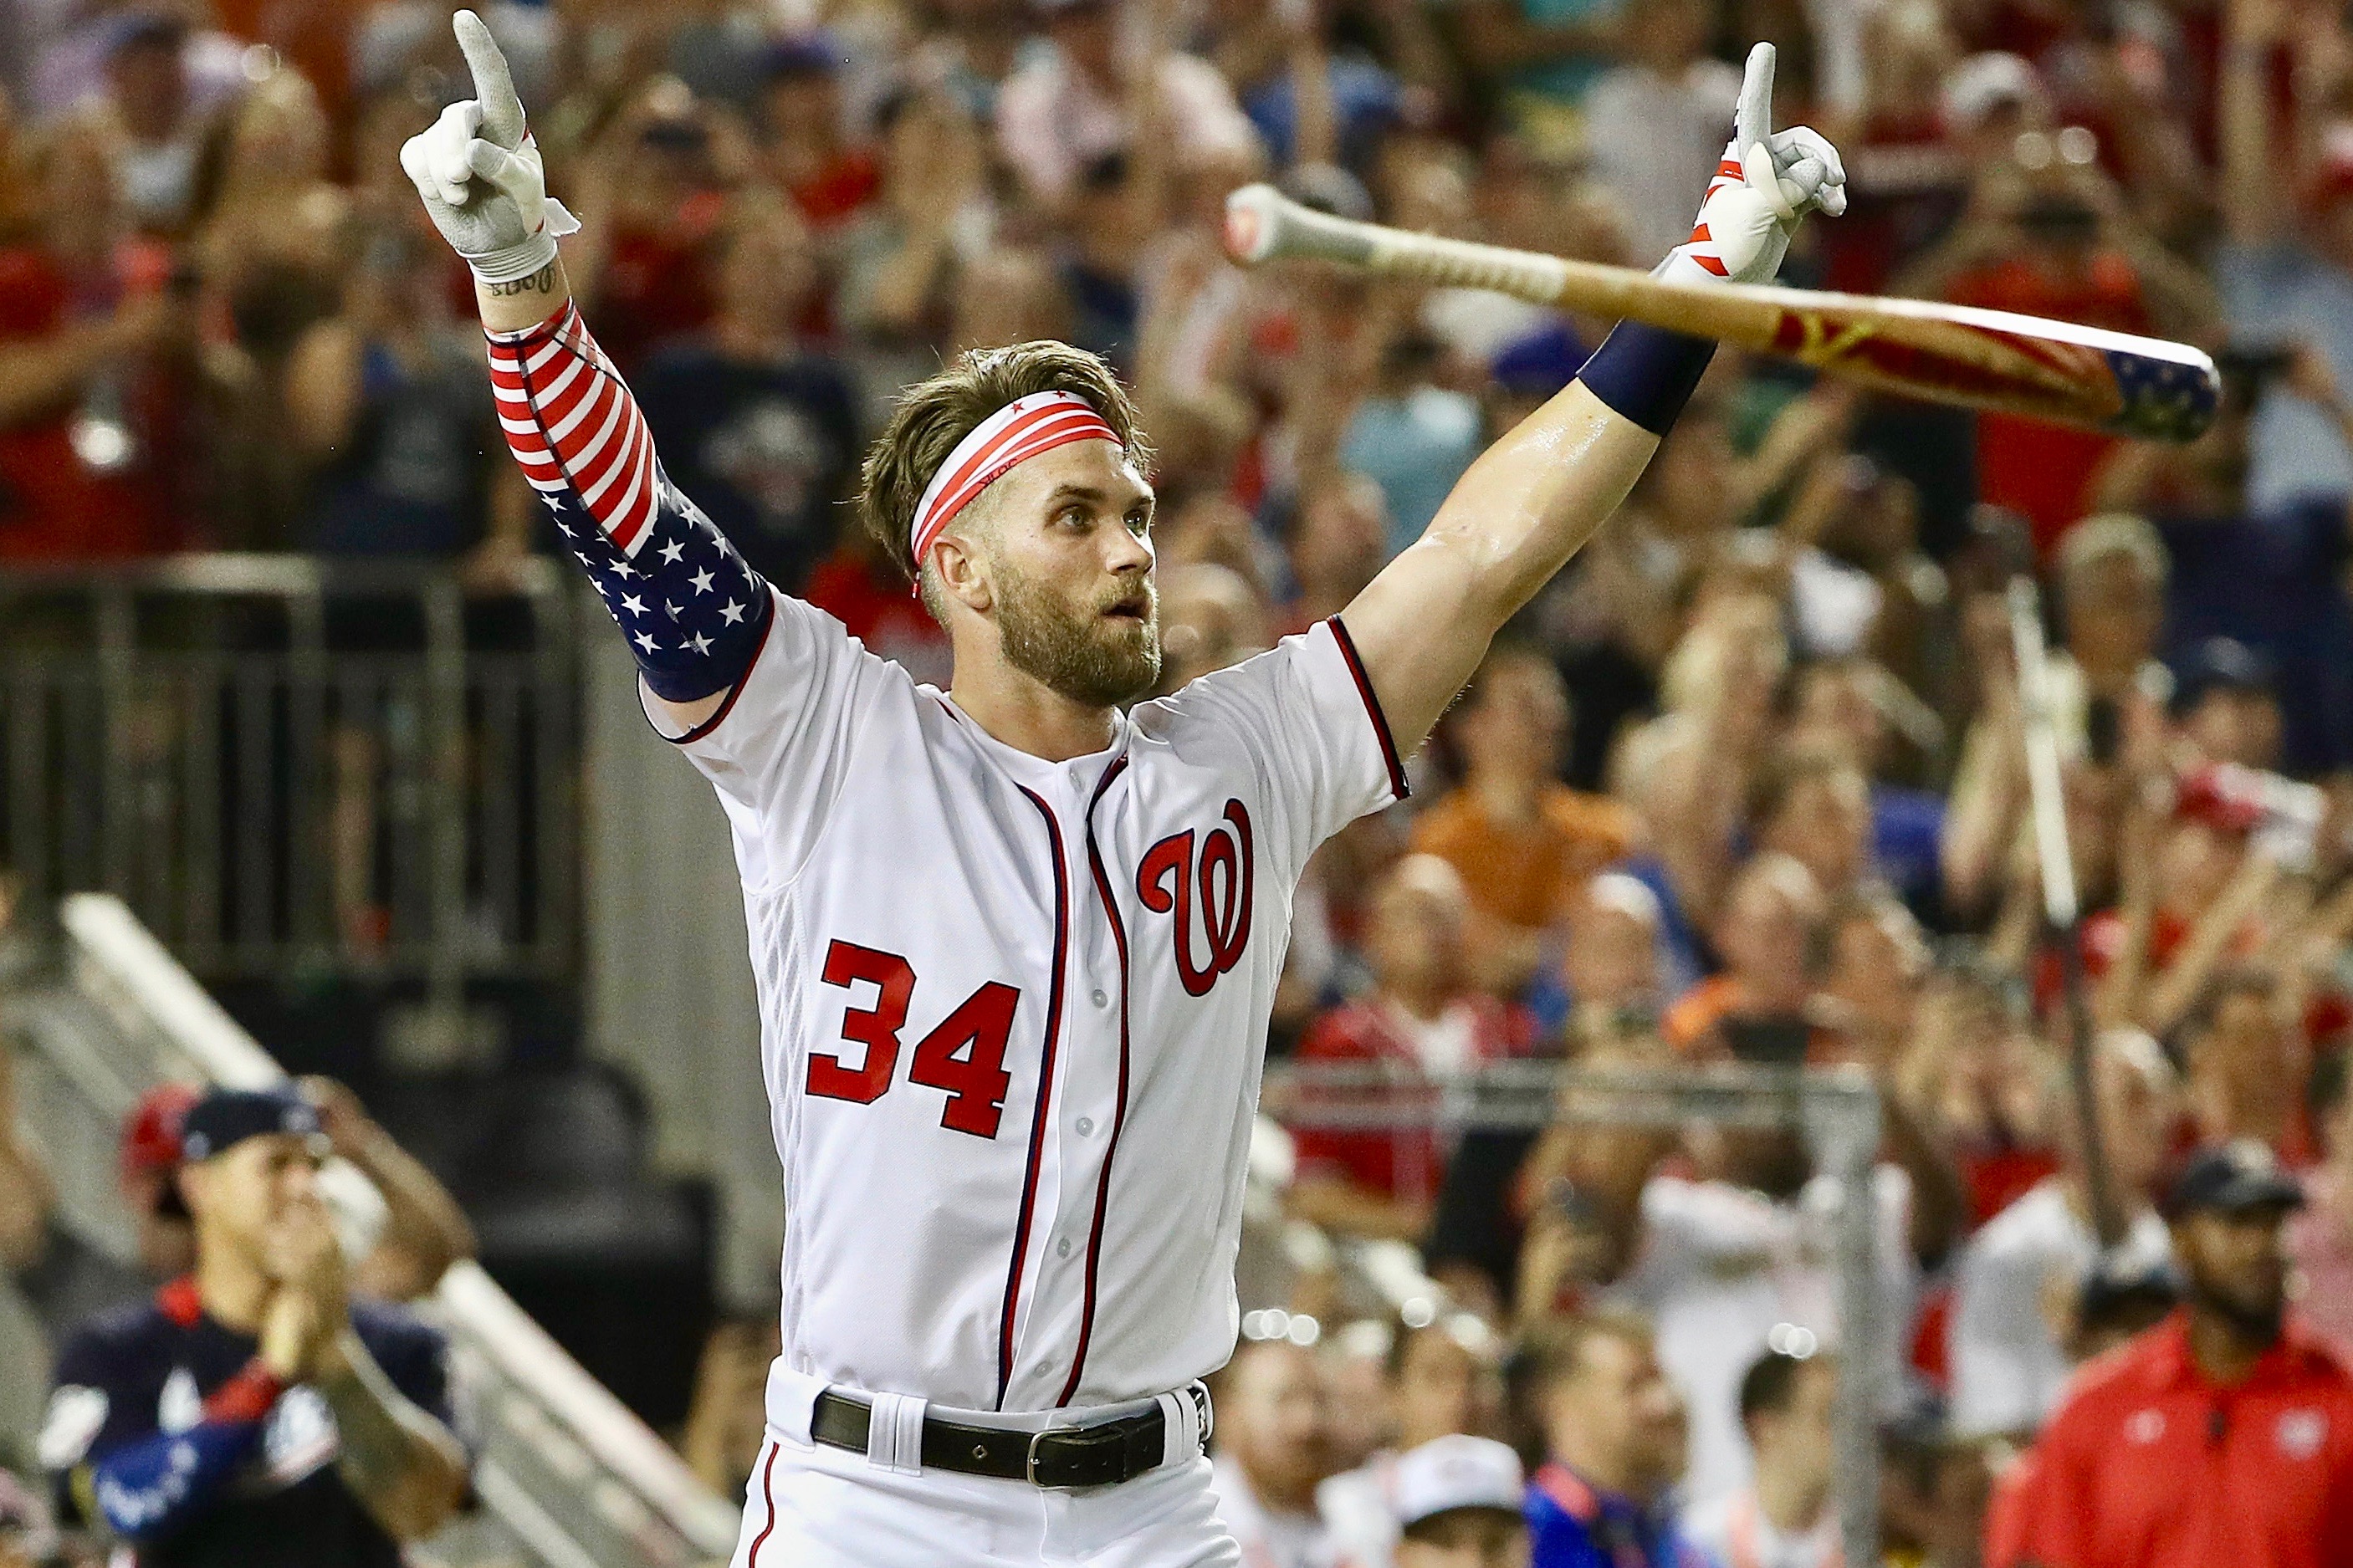 Washington Nationals' Bryce Harper of the National League bats in the 2018  Home Run Derby during the All Star break at Nationals Park in Washington,  D.C. on July 16, 2018. Photo by